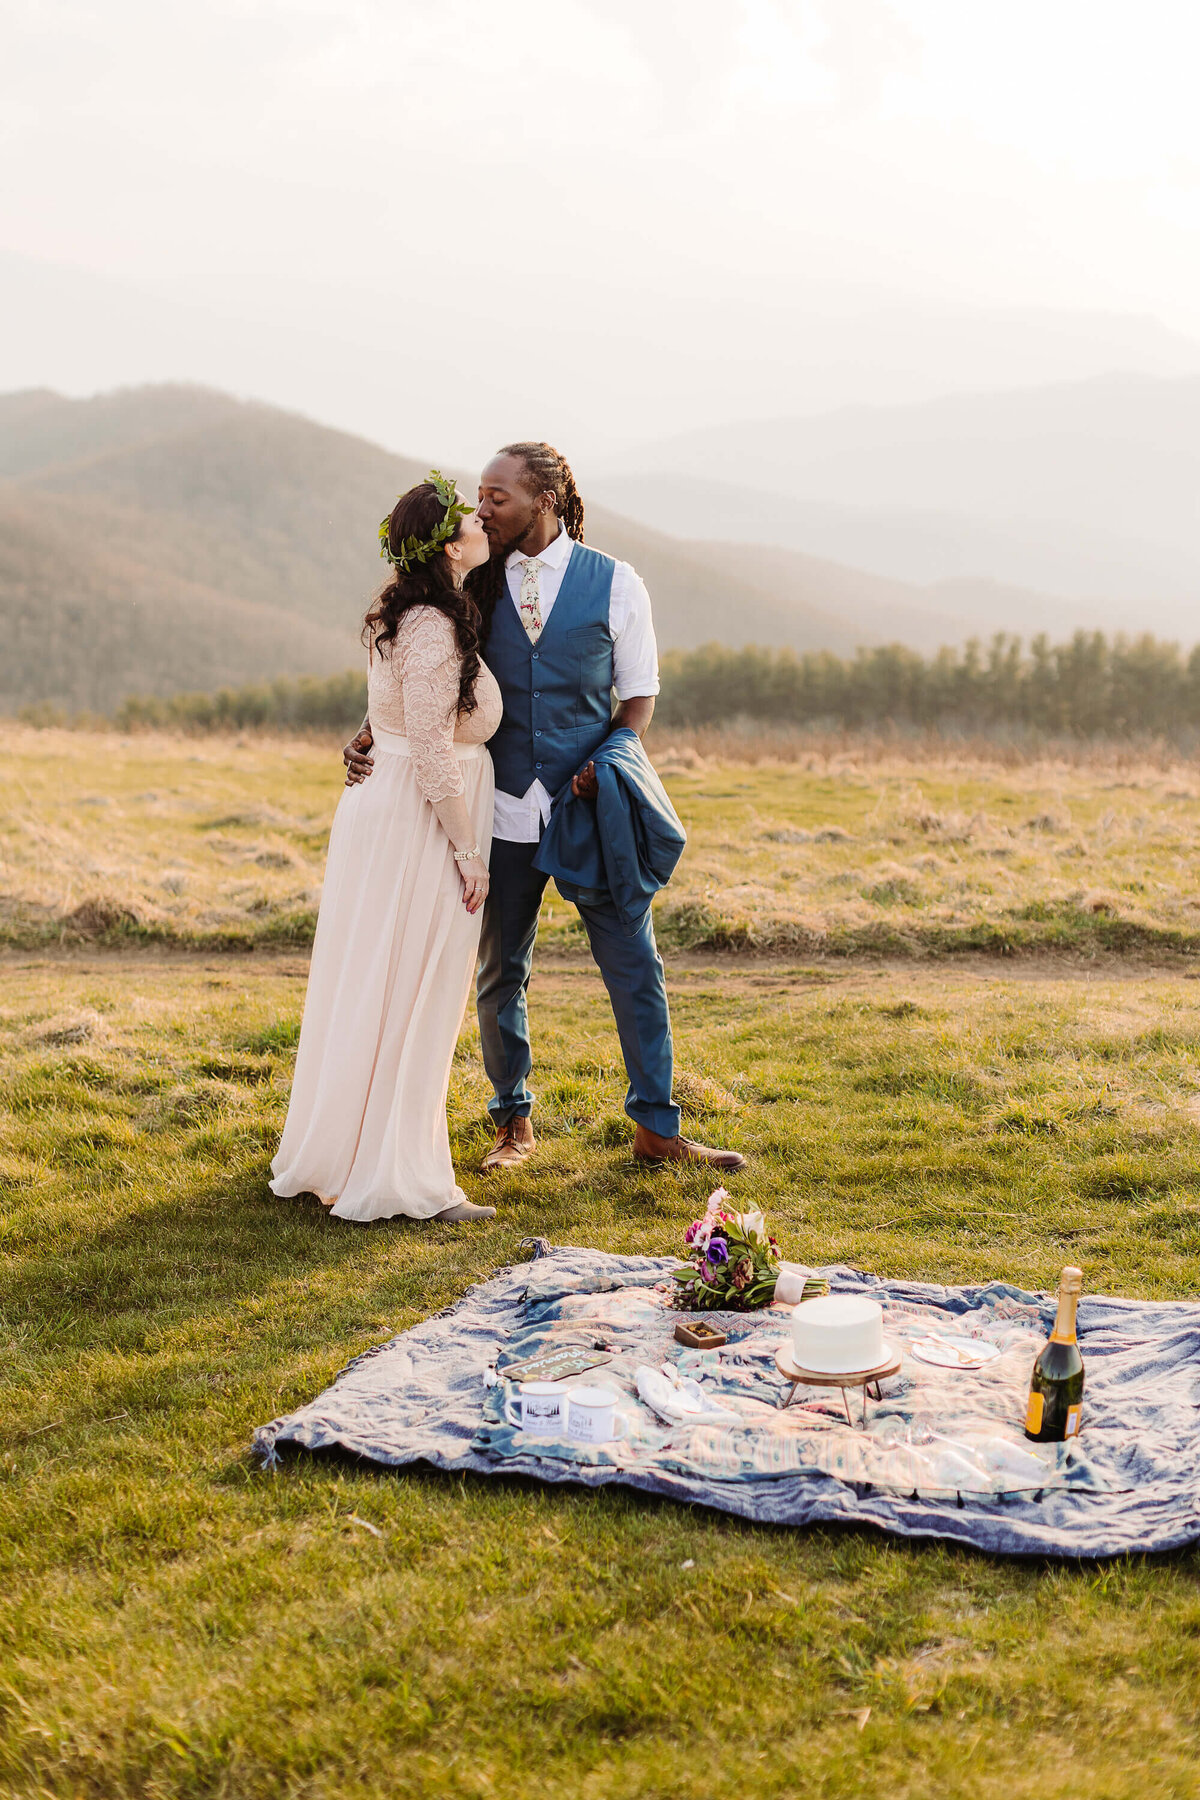 Max-Patch-Sunset-Mountain-Elopement-53